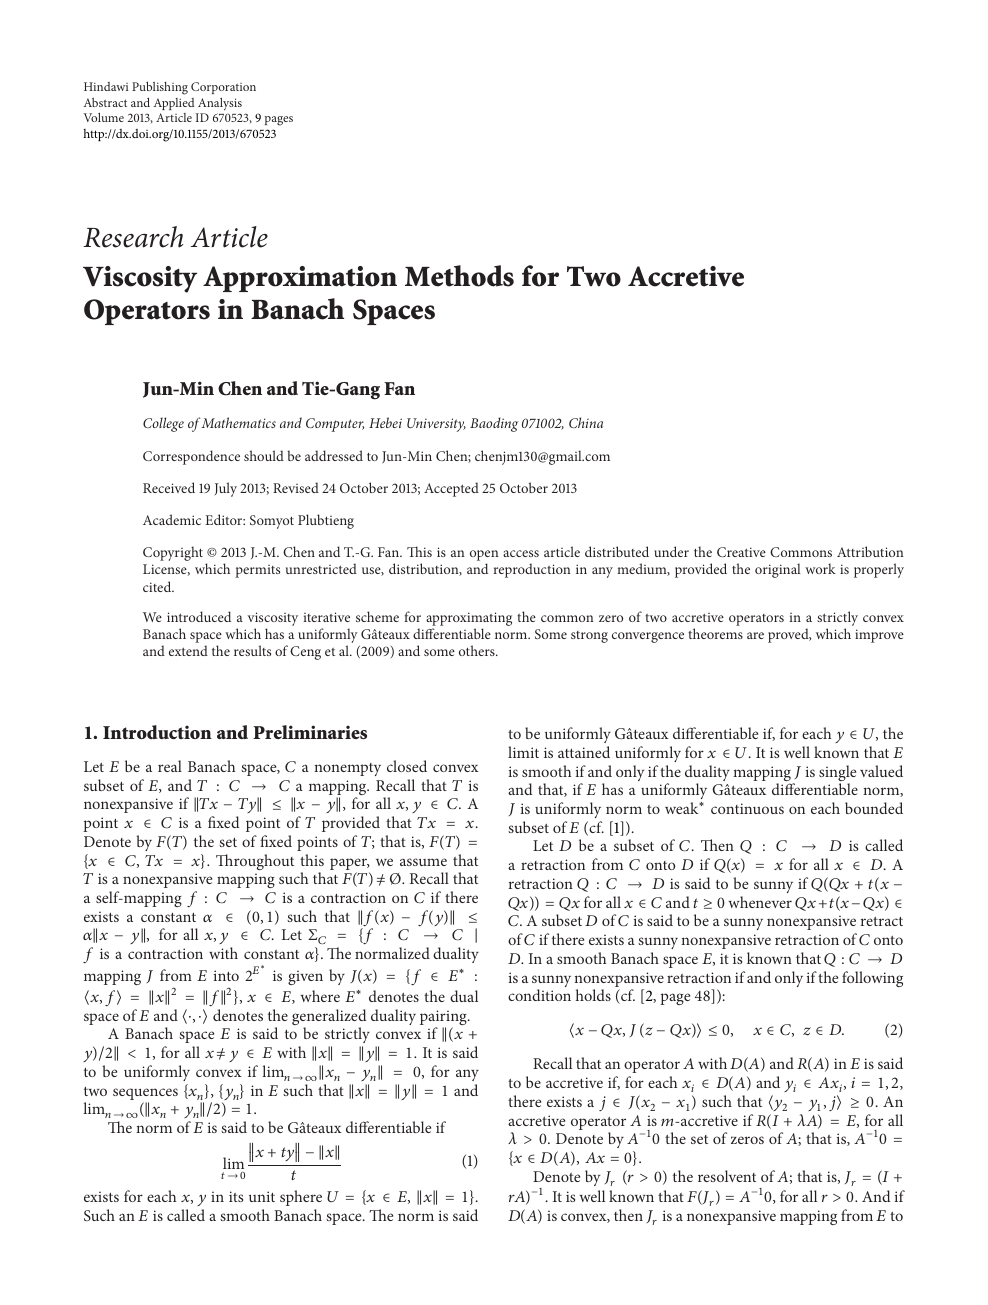 Viscosity Approximation Methods For Two Accretive Operators In Banach Spaces Topic Of Research Paper In Mathematics Download Scholarly Article Pdf And Read For Free On Cyberleninka Open Science Hub